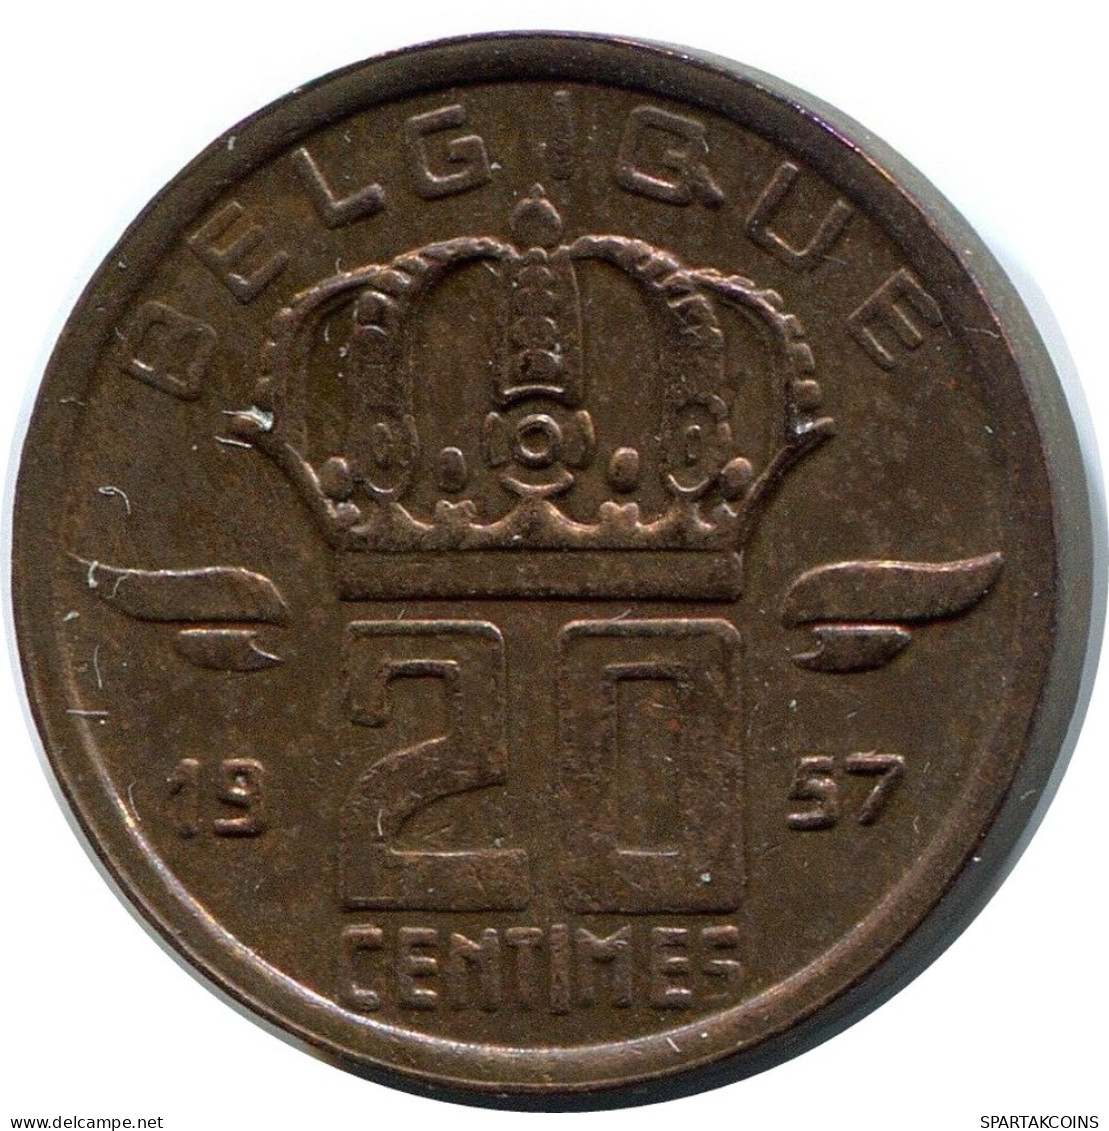 20 CENTIMES 1957 FRENCH Text BELGIUM Coin #BA399.U.A - 25 Centimes